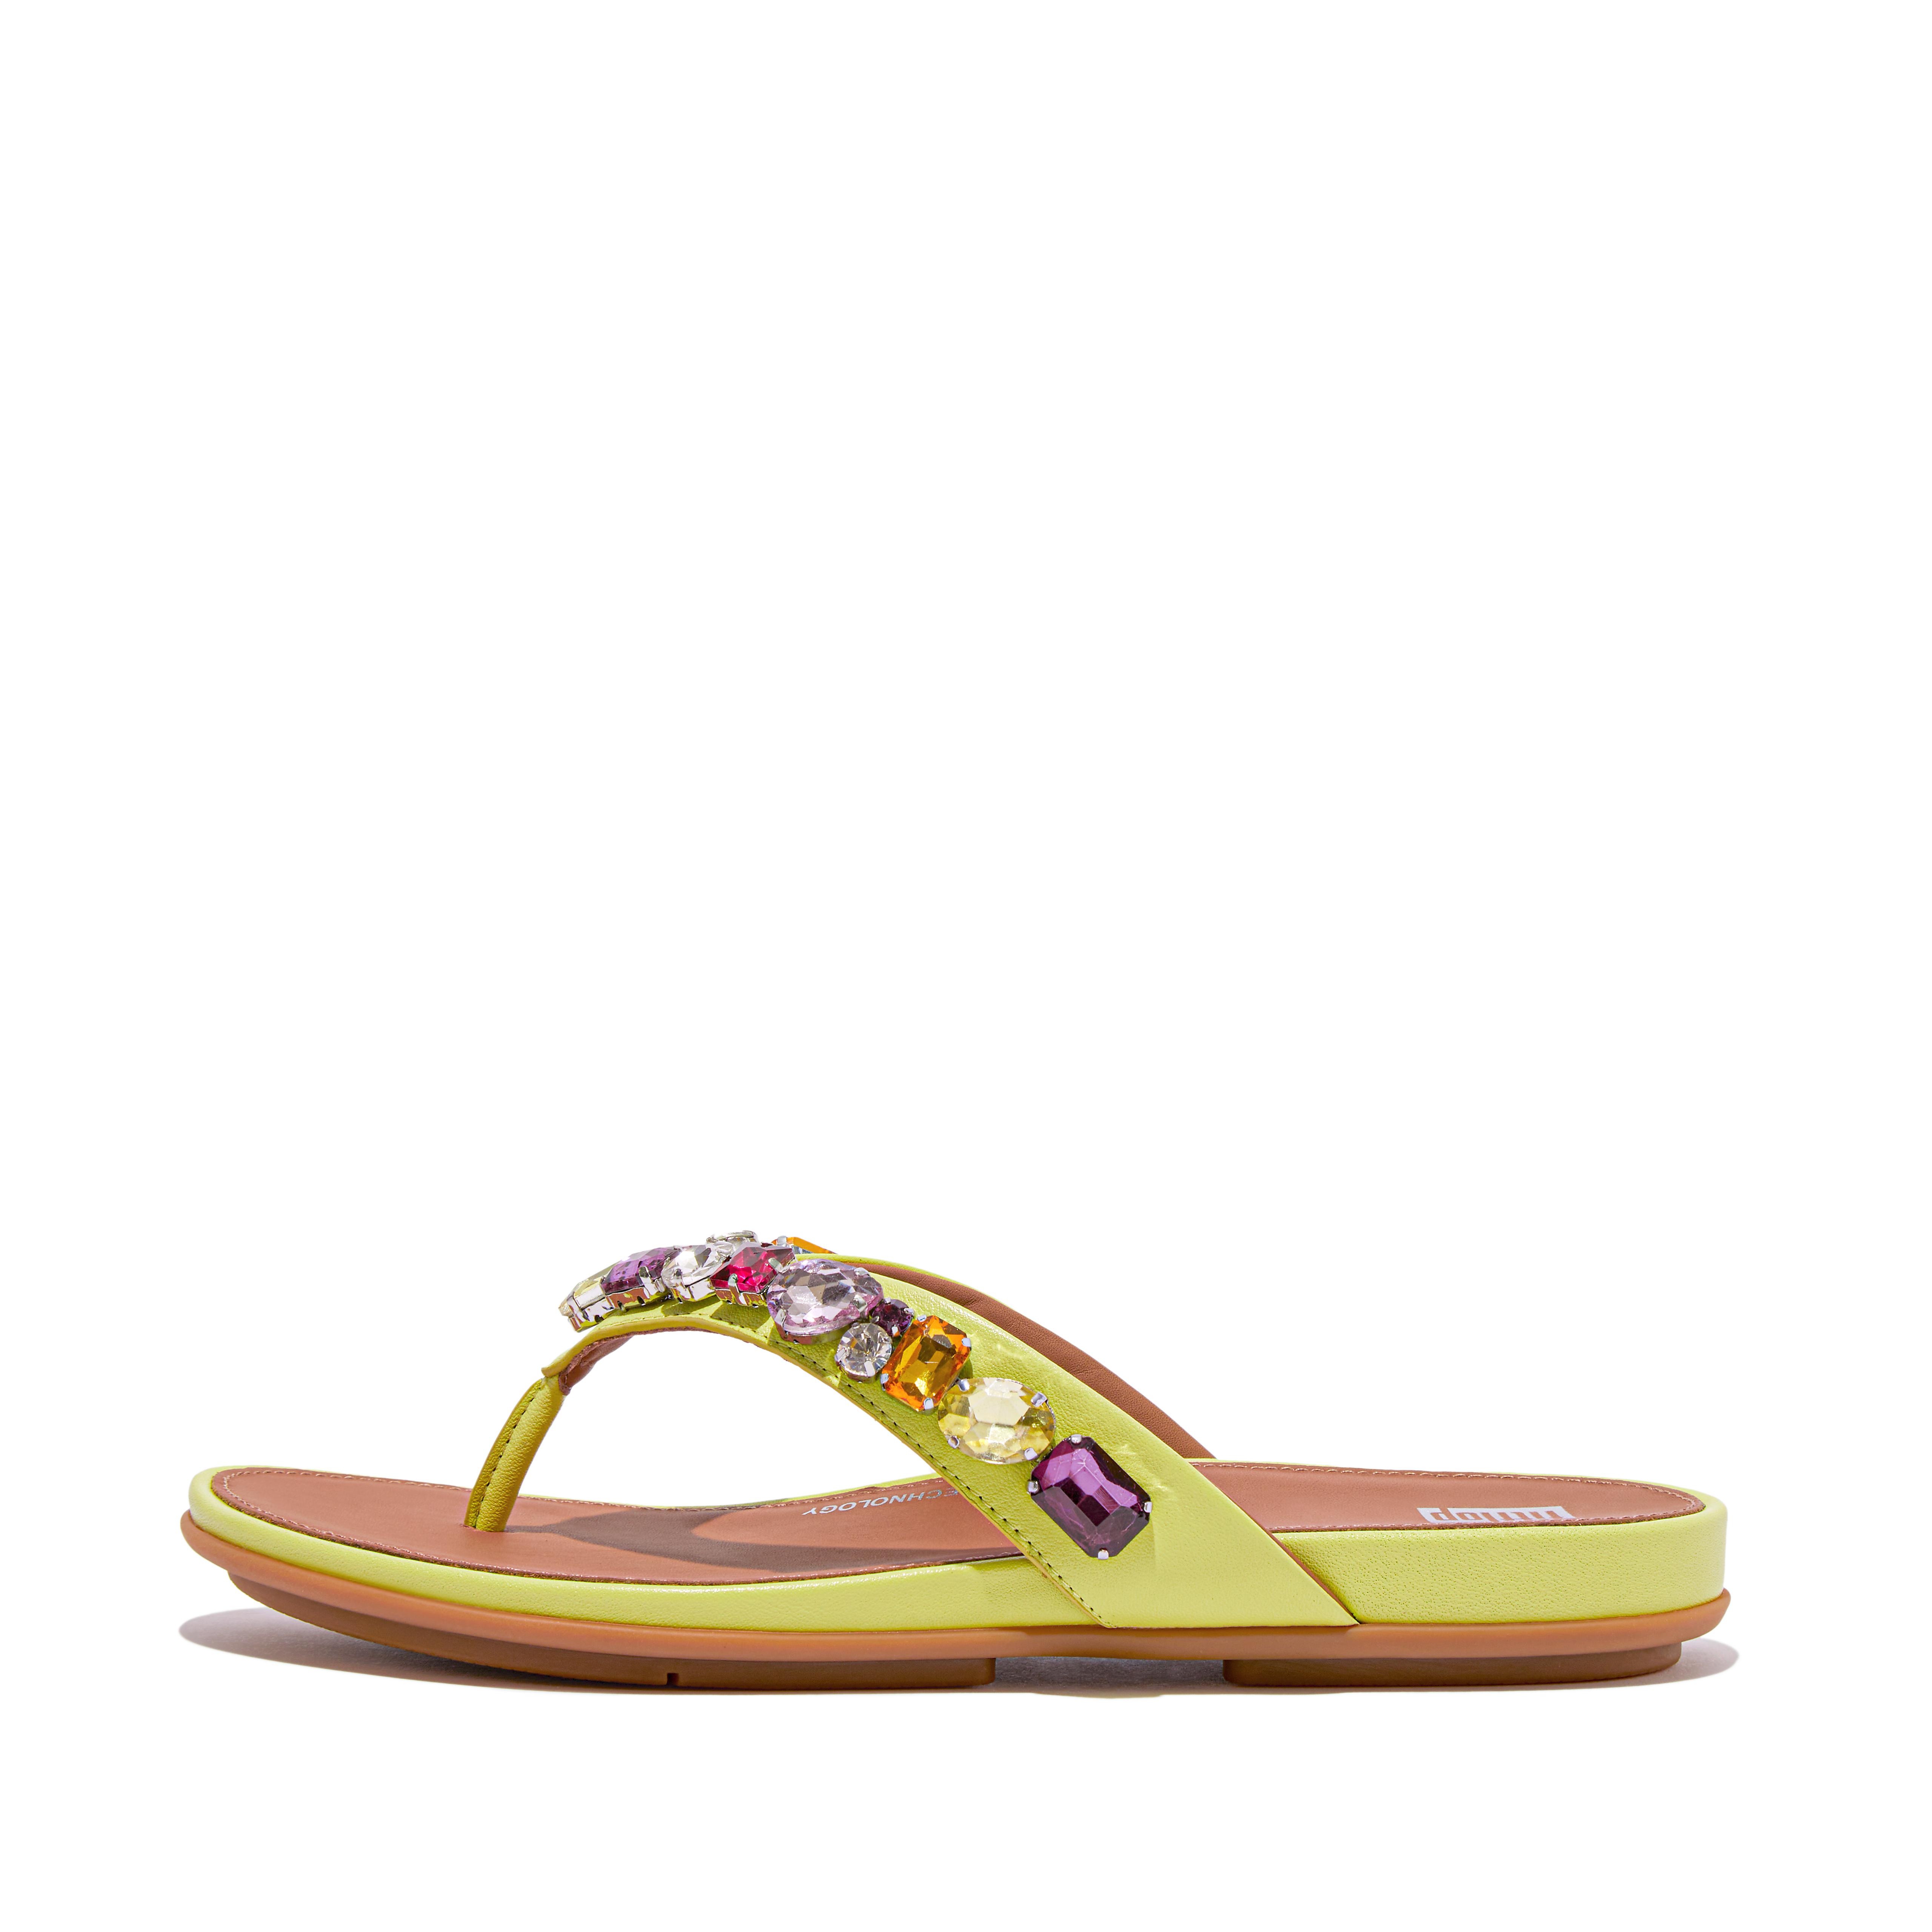 Fitflop Jewel-Deluxe Leather Flip-Flops,Sunny Lime